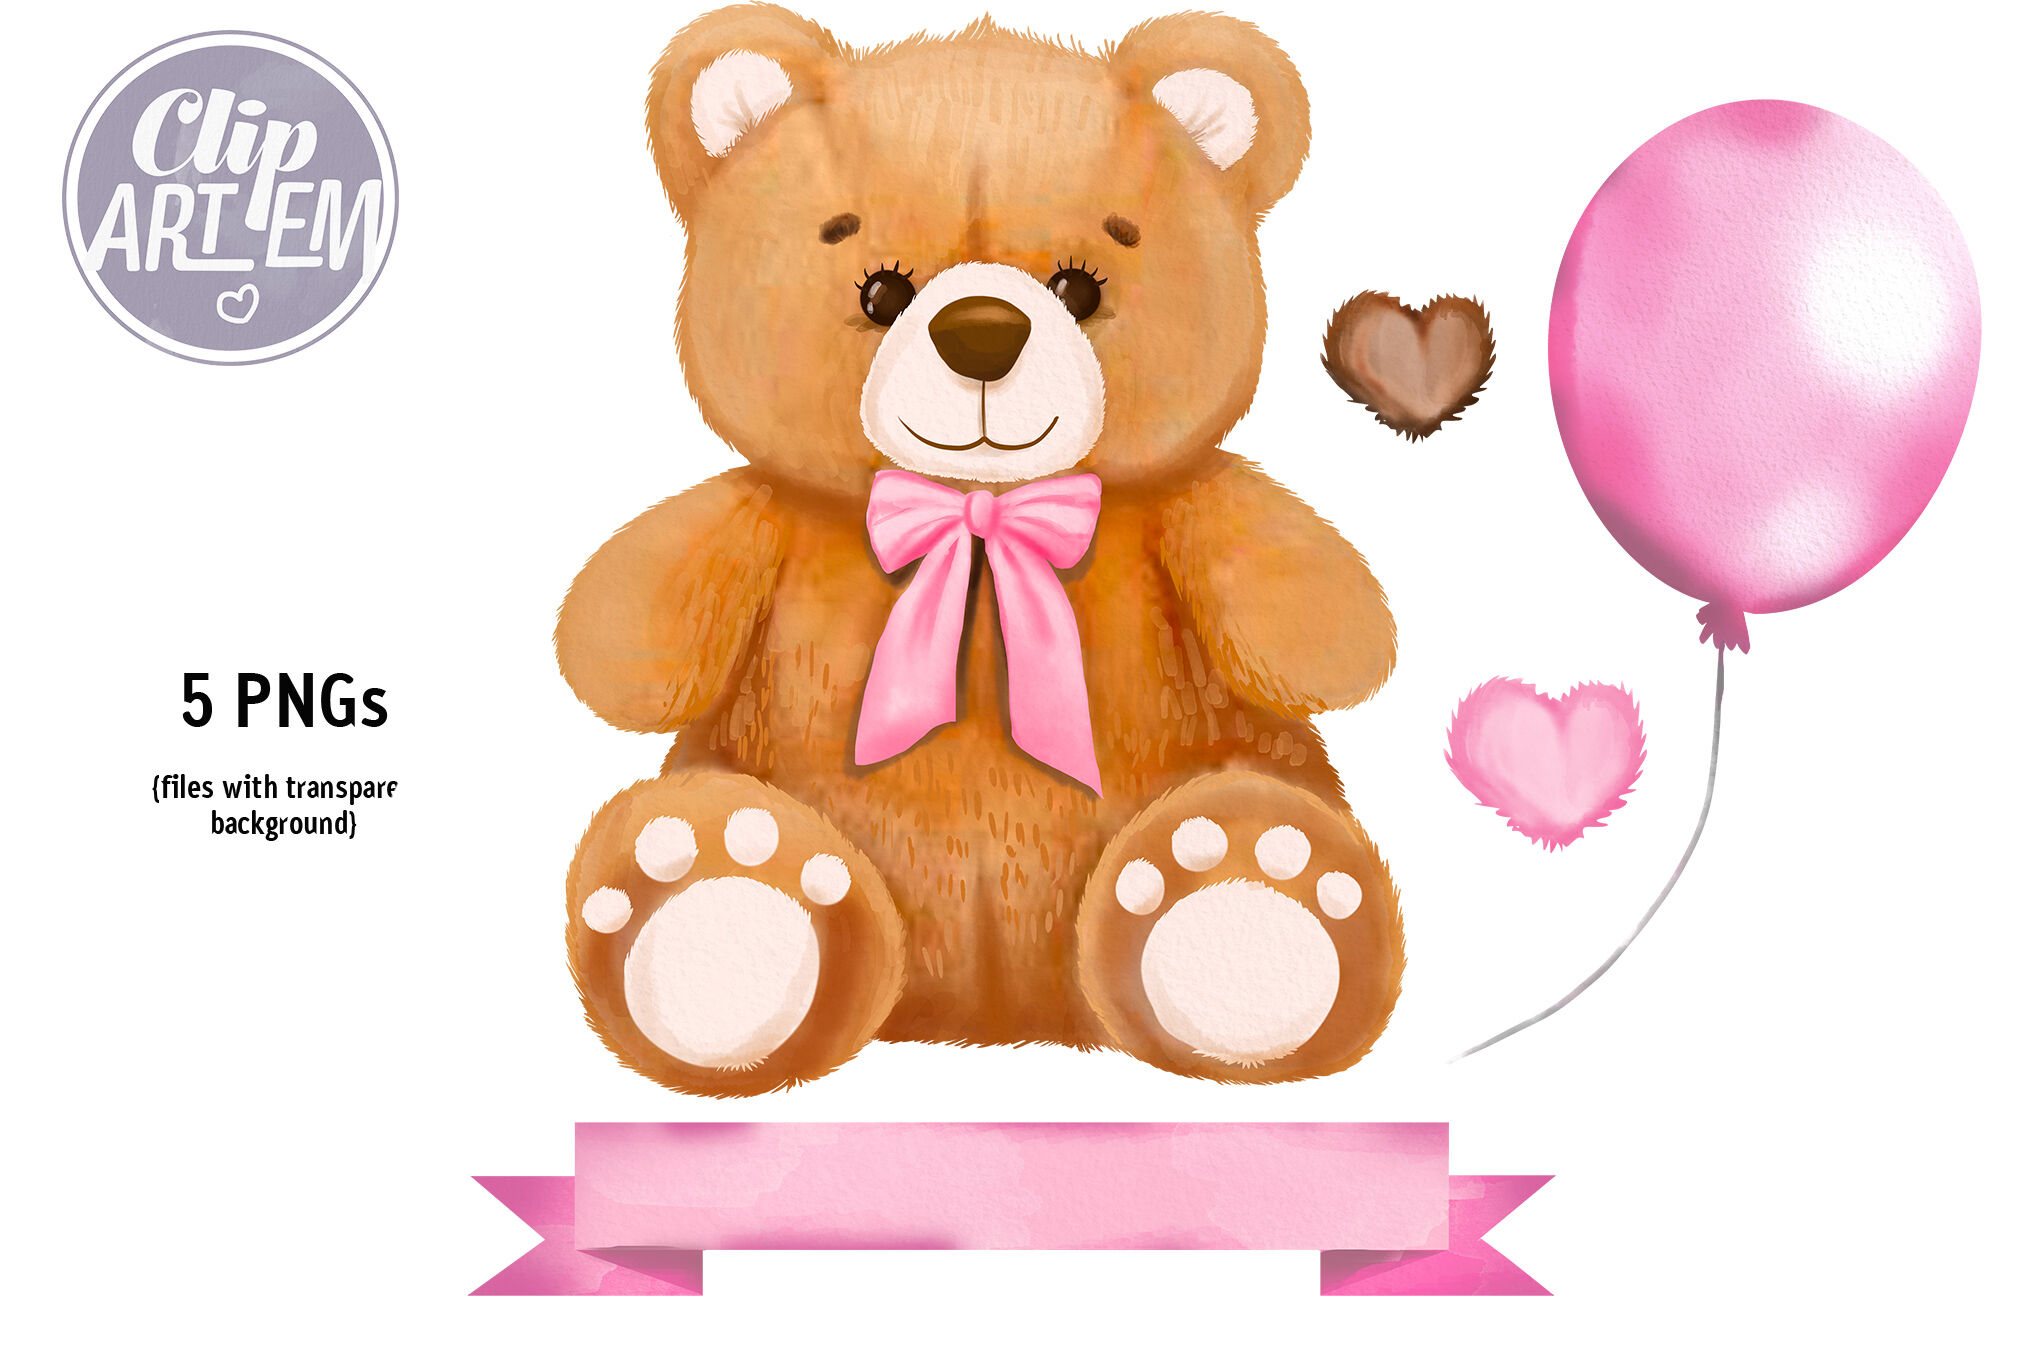 Watercolor Cute Teddy Bear, Girl, Teddy, Baby PNG Transparent Image and  Clipart for Free Download